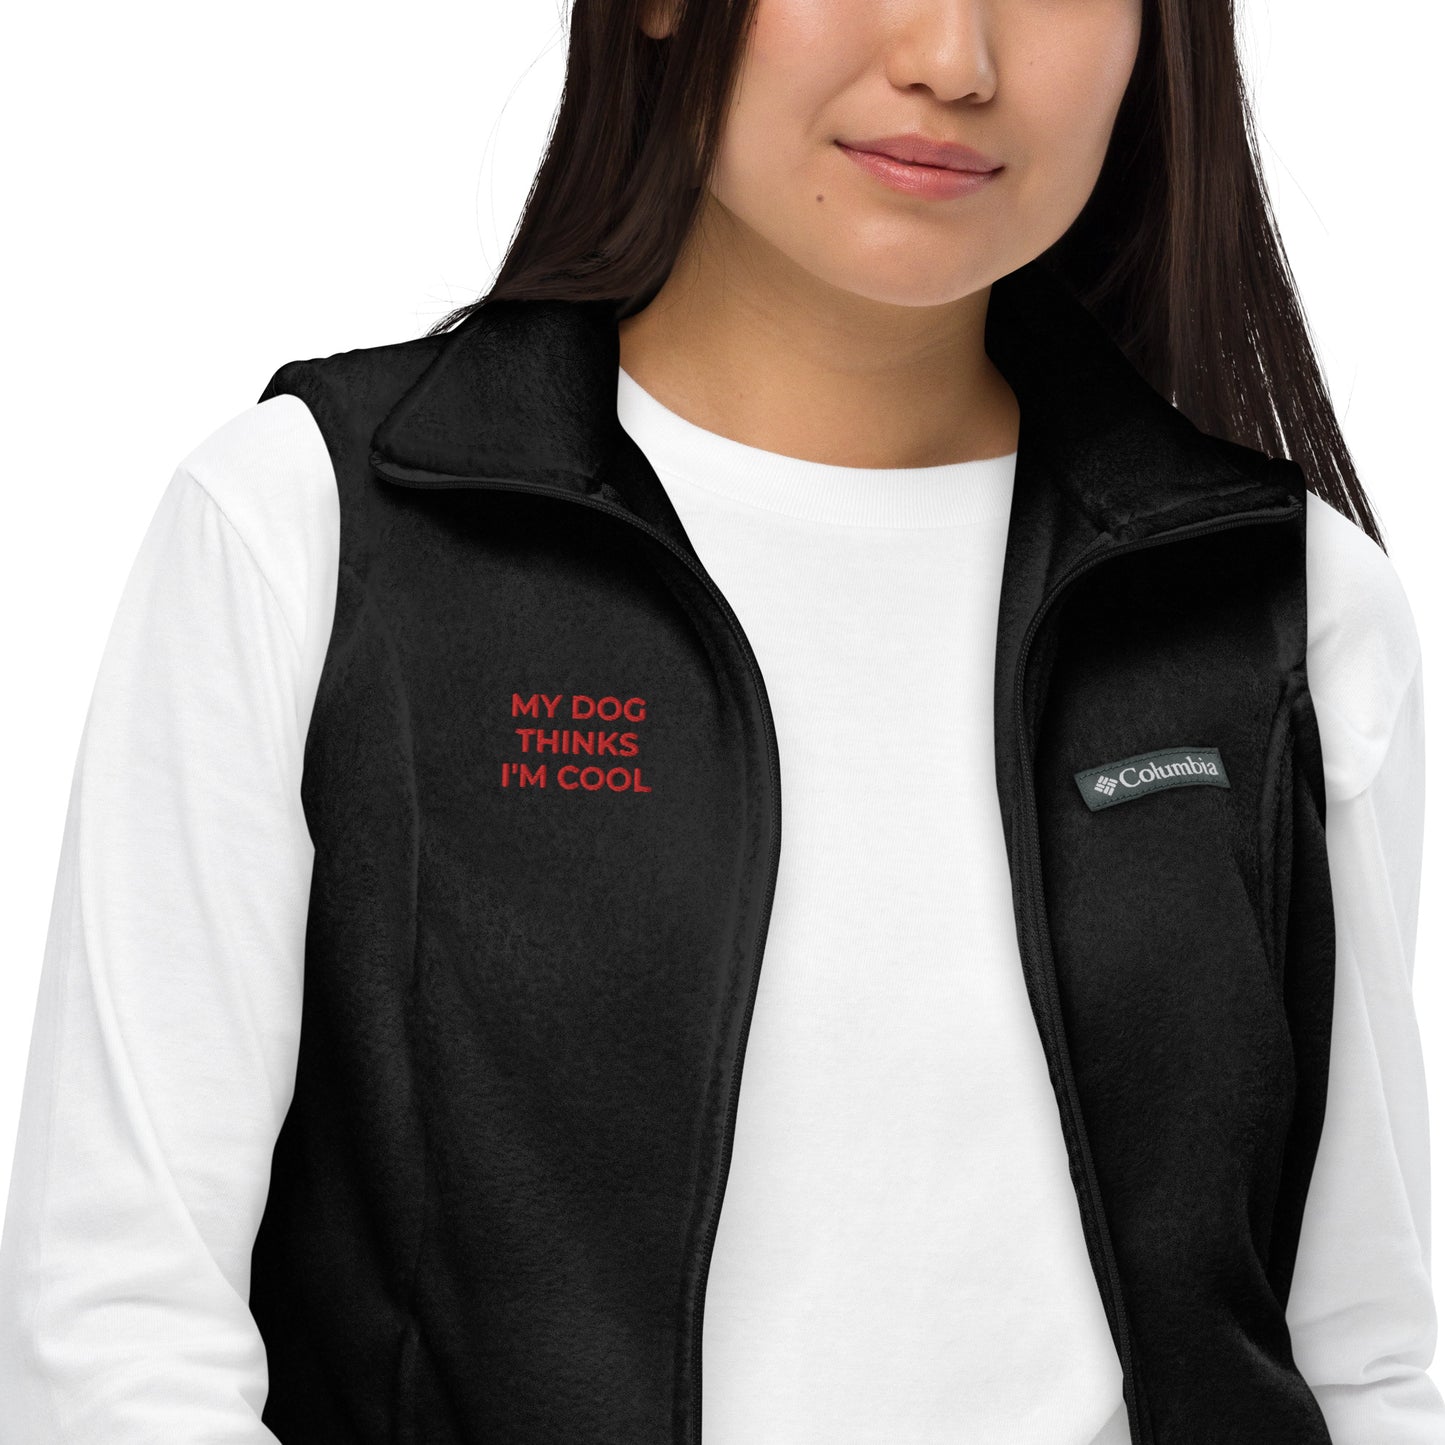 Women’s Columbia fleece vest, flat embroidery, red "MY DOG THINKS I'M COOL"